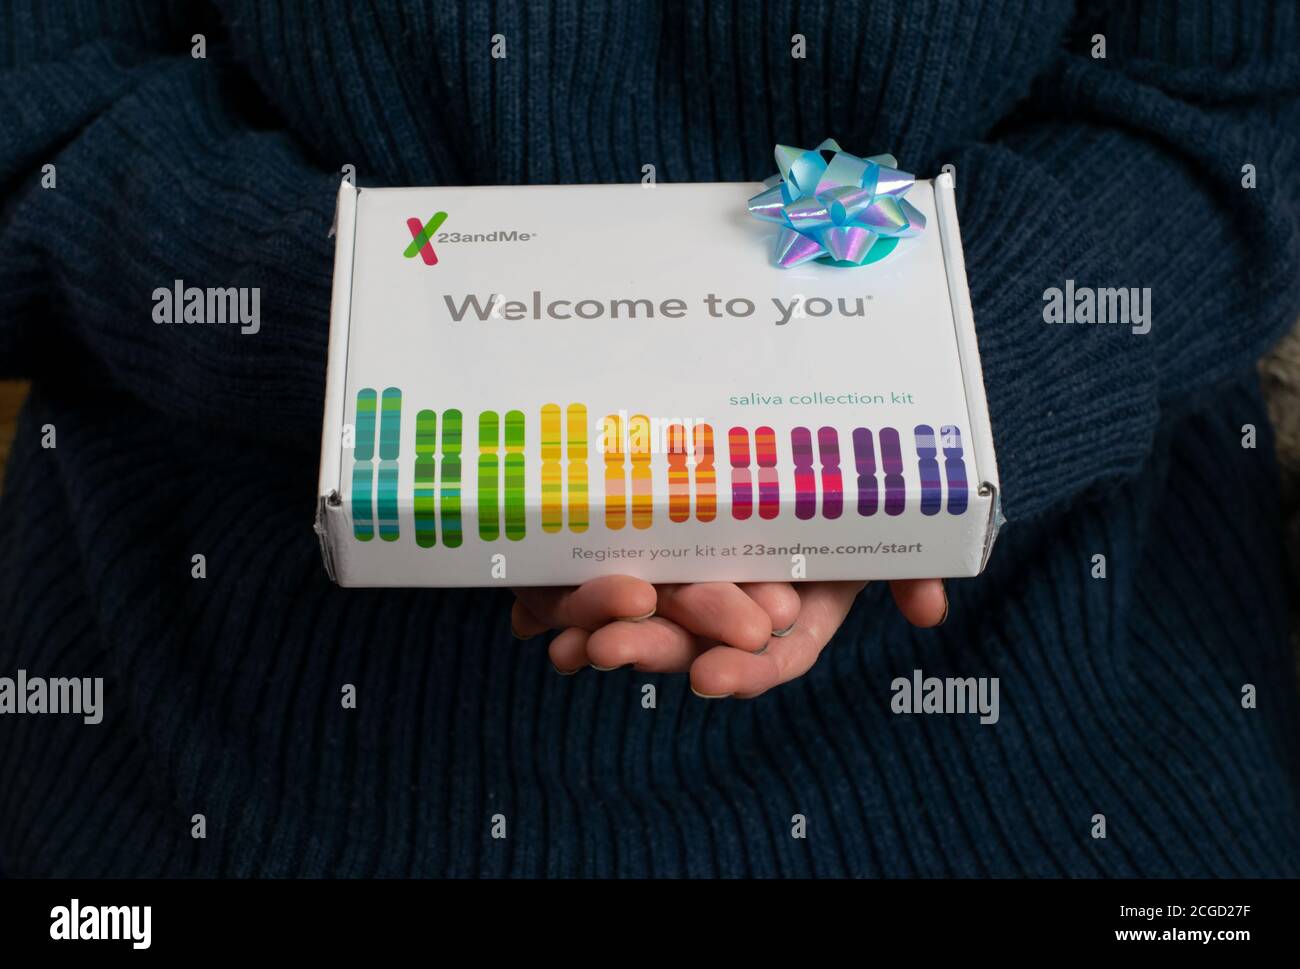 23 and me human DNA testing kit gift with blue gift bow held by two hands. Saliva sampling kit with text Welcome to You. Stock Photo